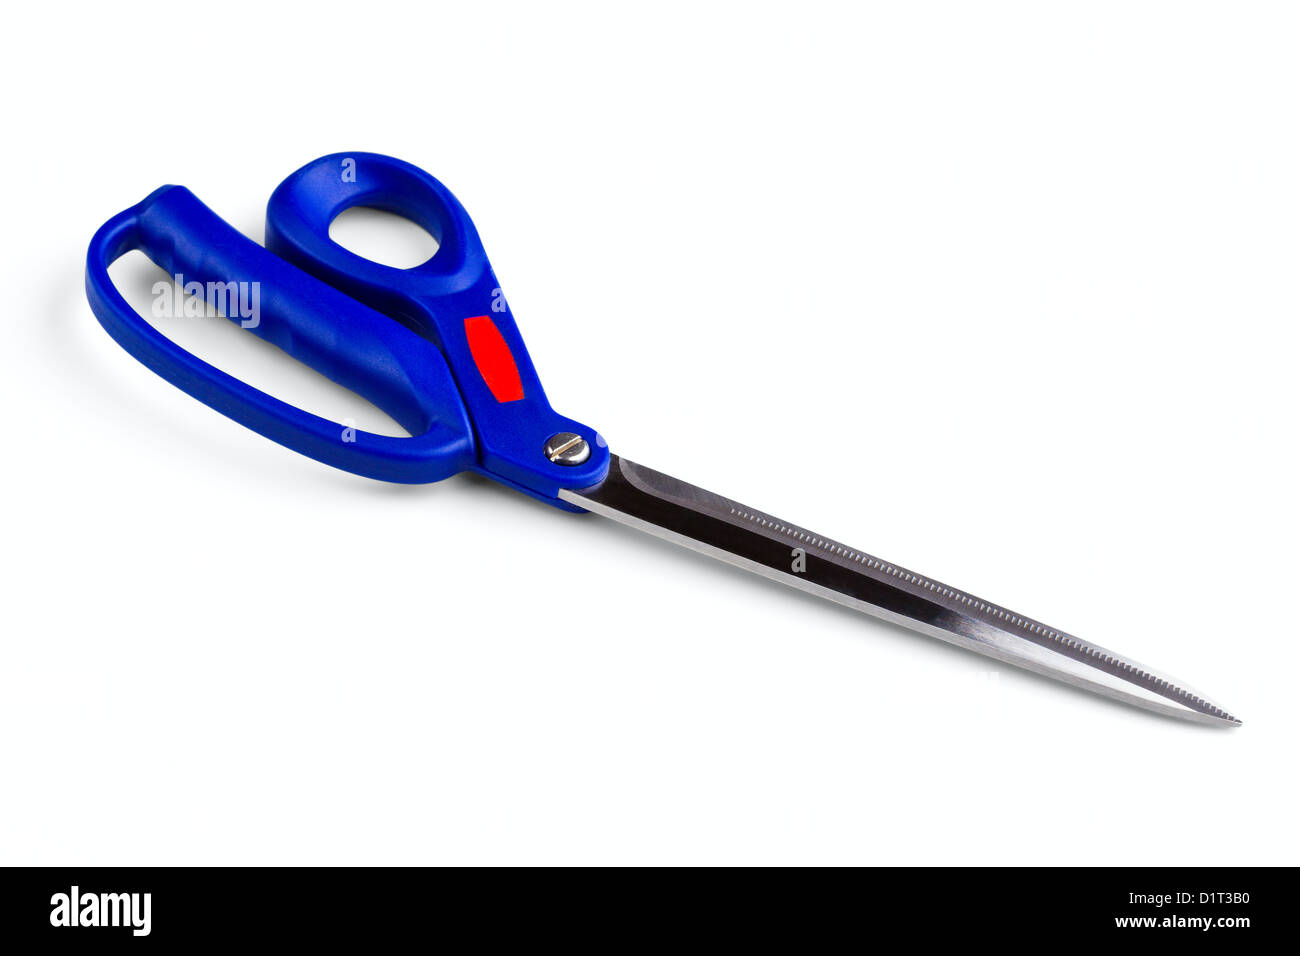 heavy duty scissors isolated on a white background Stock Photo